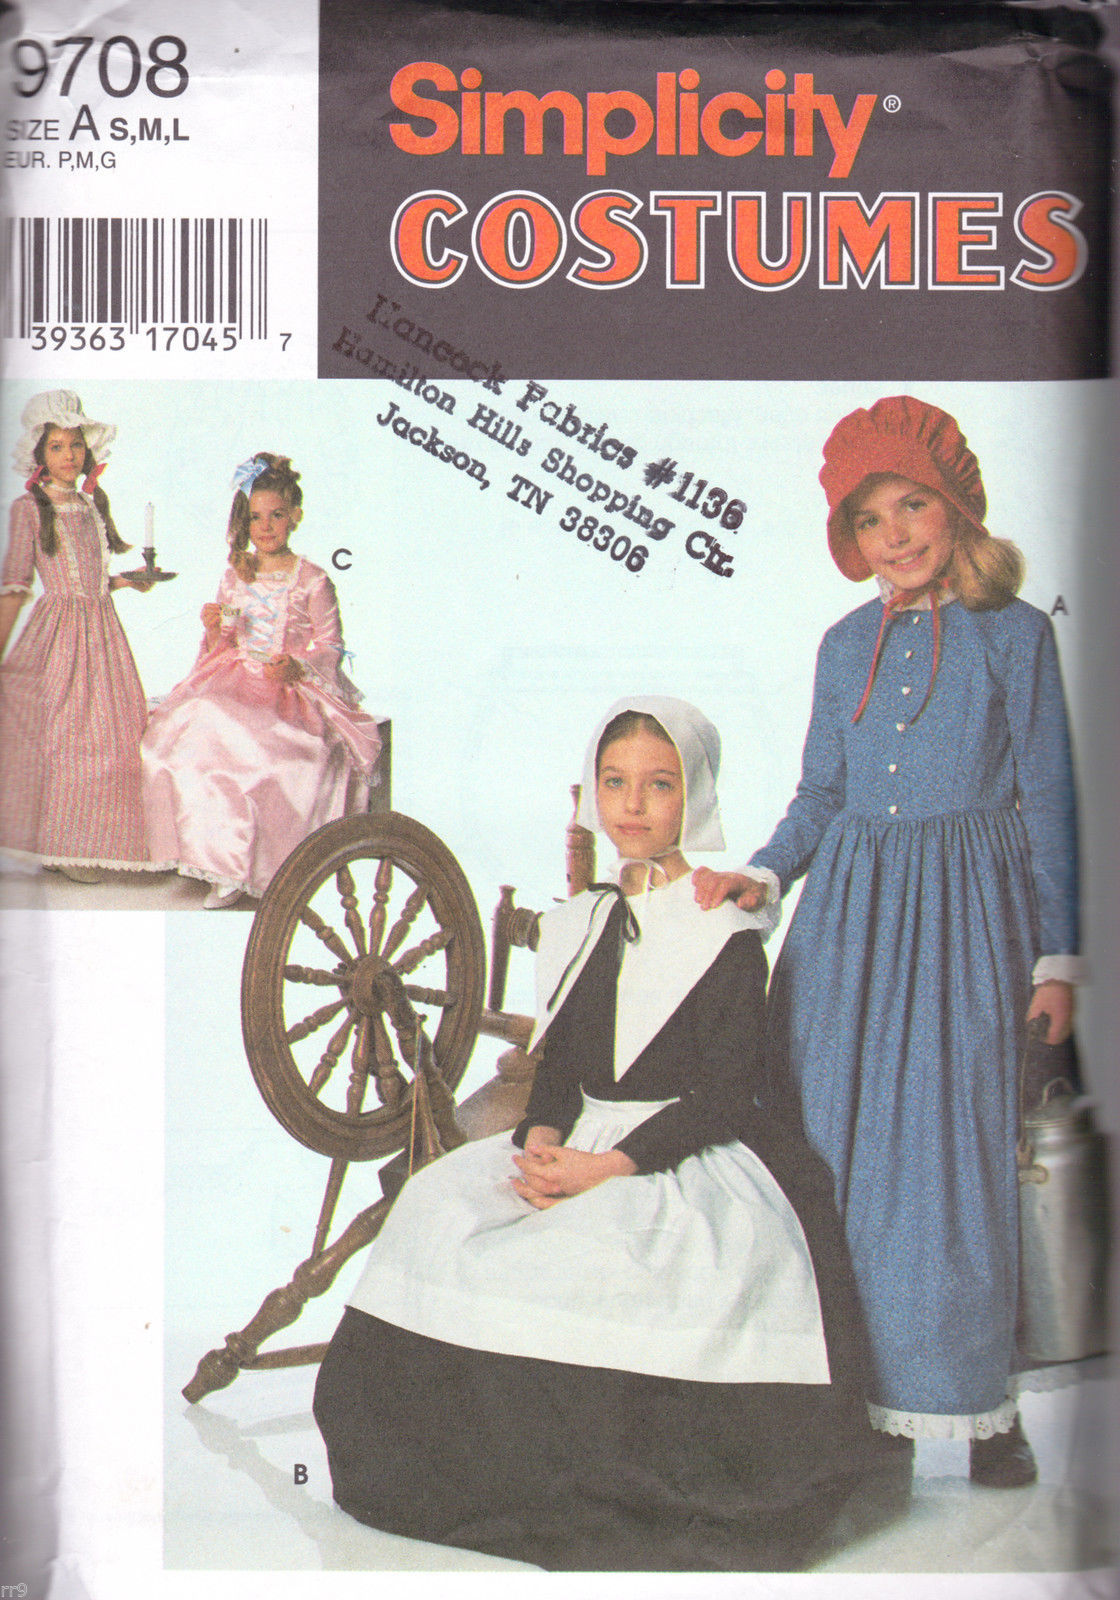 Primary image for Simplicity 9708 Costumes Child's & Girls' Puritan, Centennial, Etc...